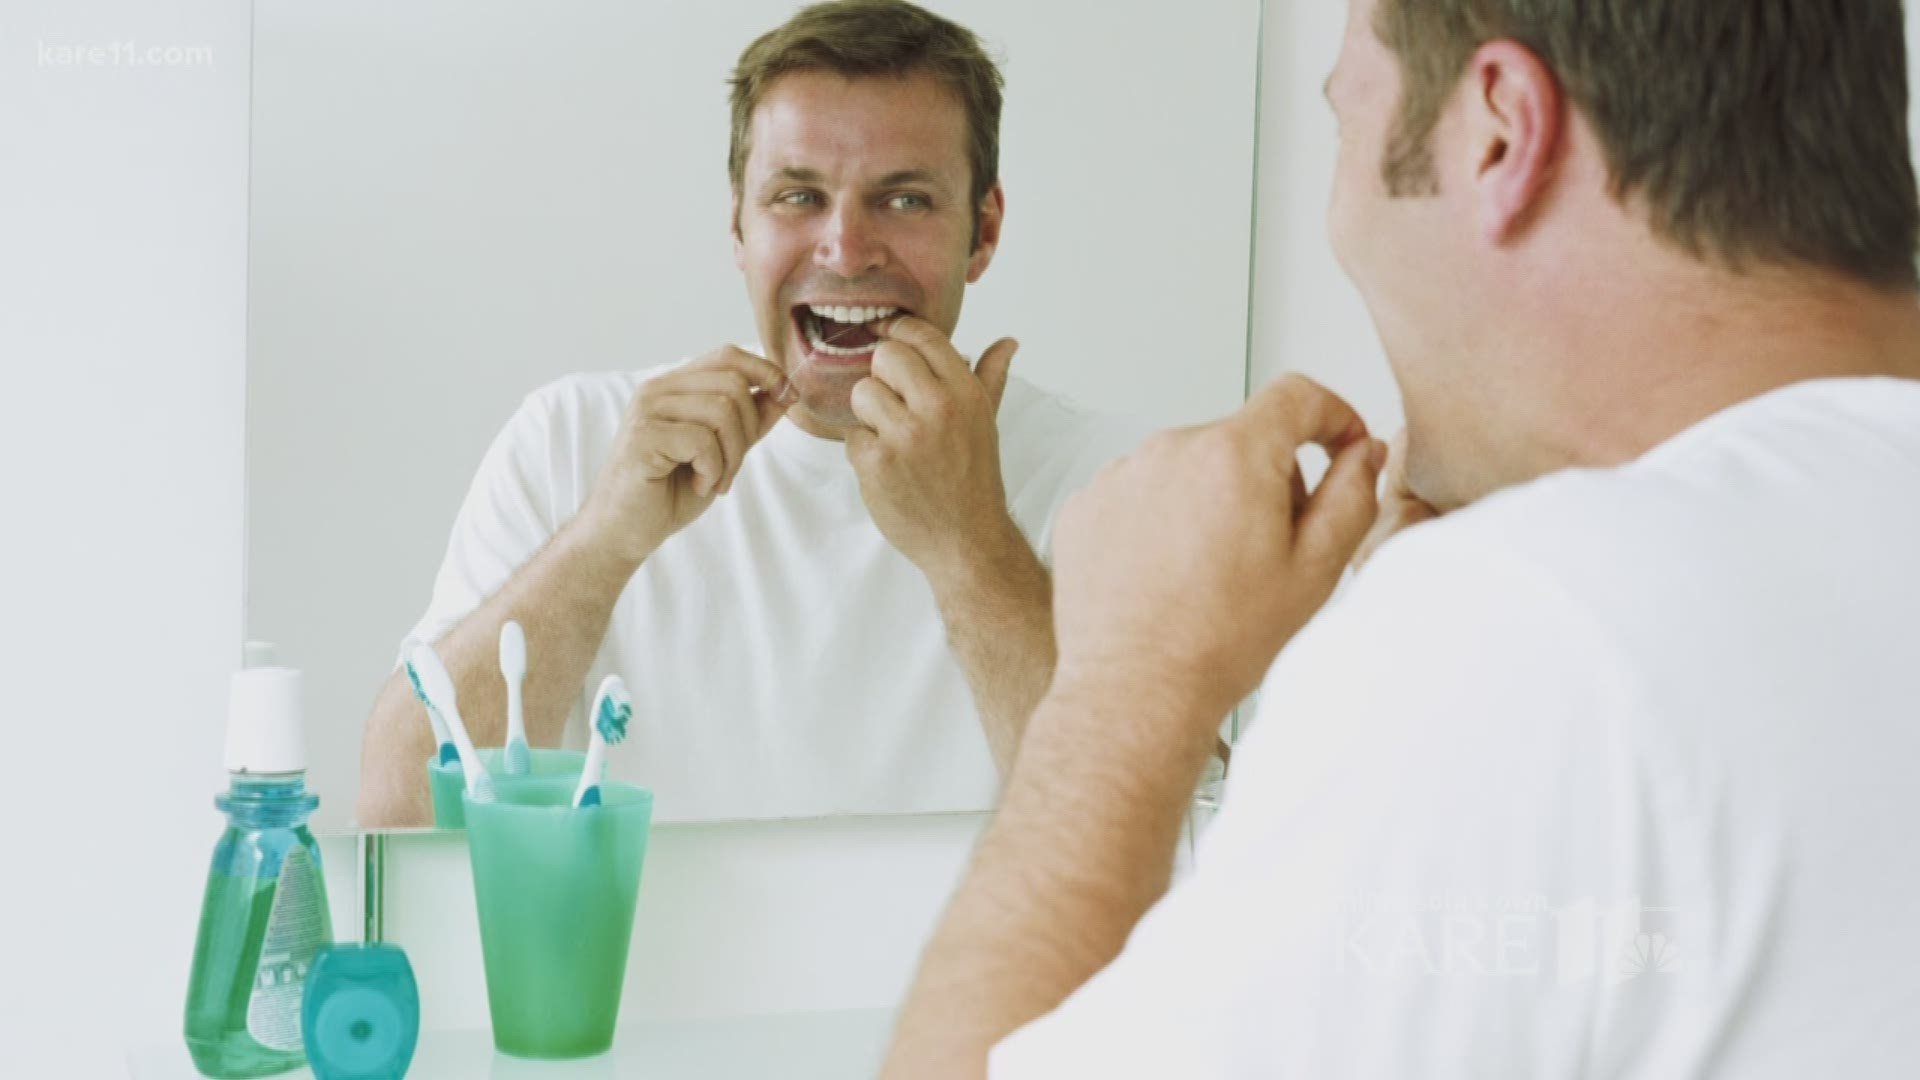 When it comes to dental health, sounds like us guys need to step up our game. "There's a lot of men that just come to the dentist if there's a problem, like a broken tooth or a tooth that's hurting," says David Louis, a dentist at HealthPartners Dental Cl